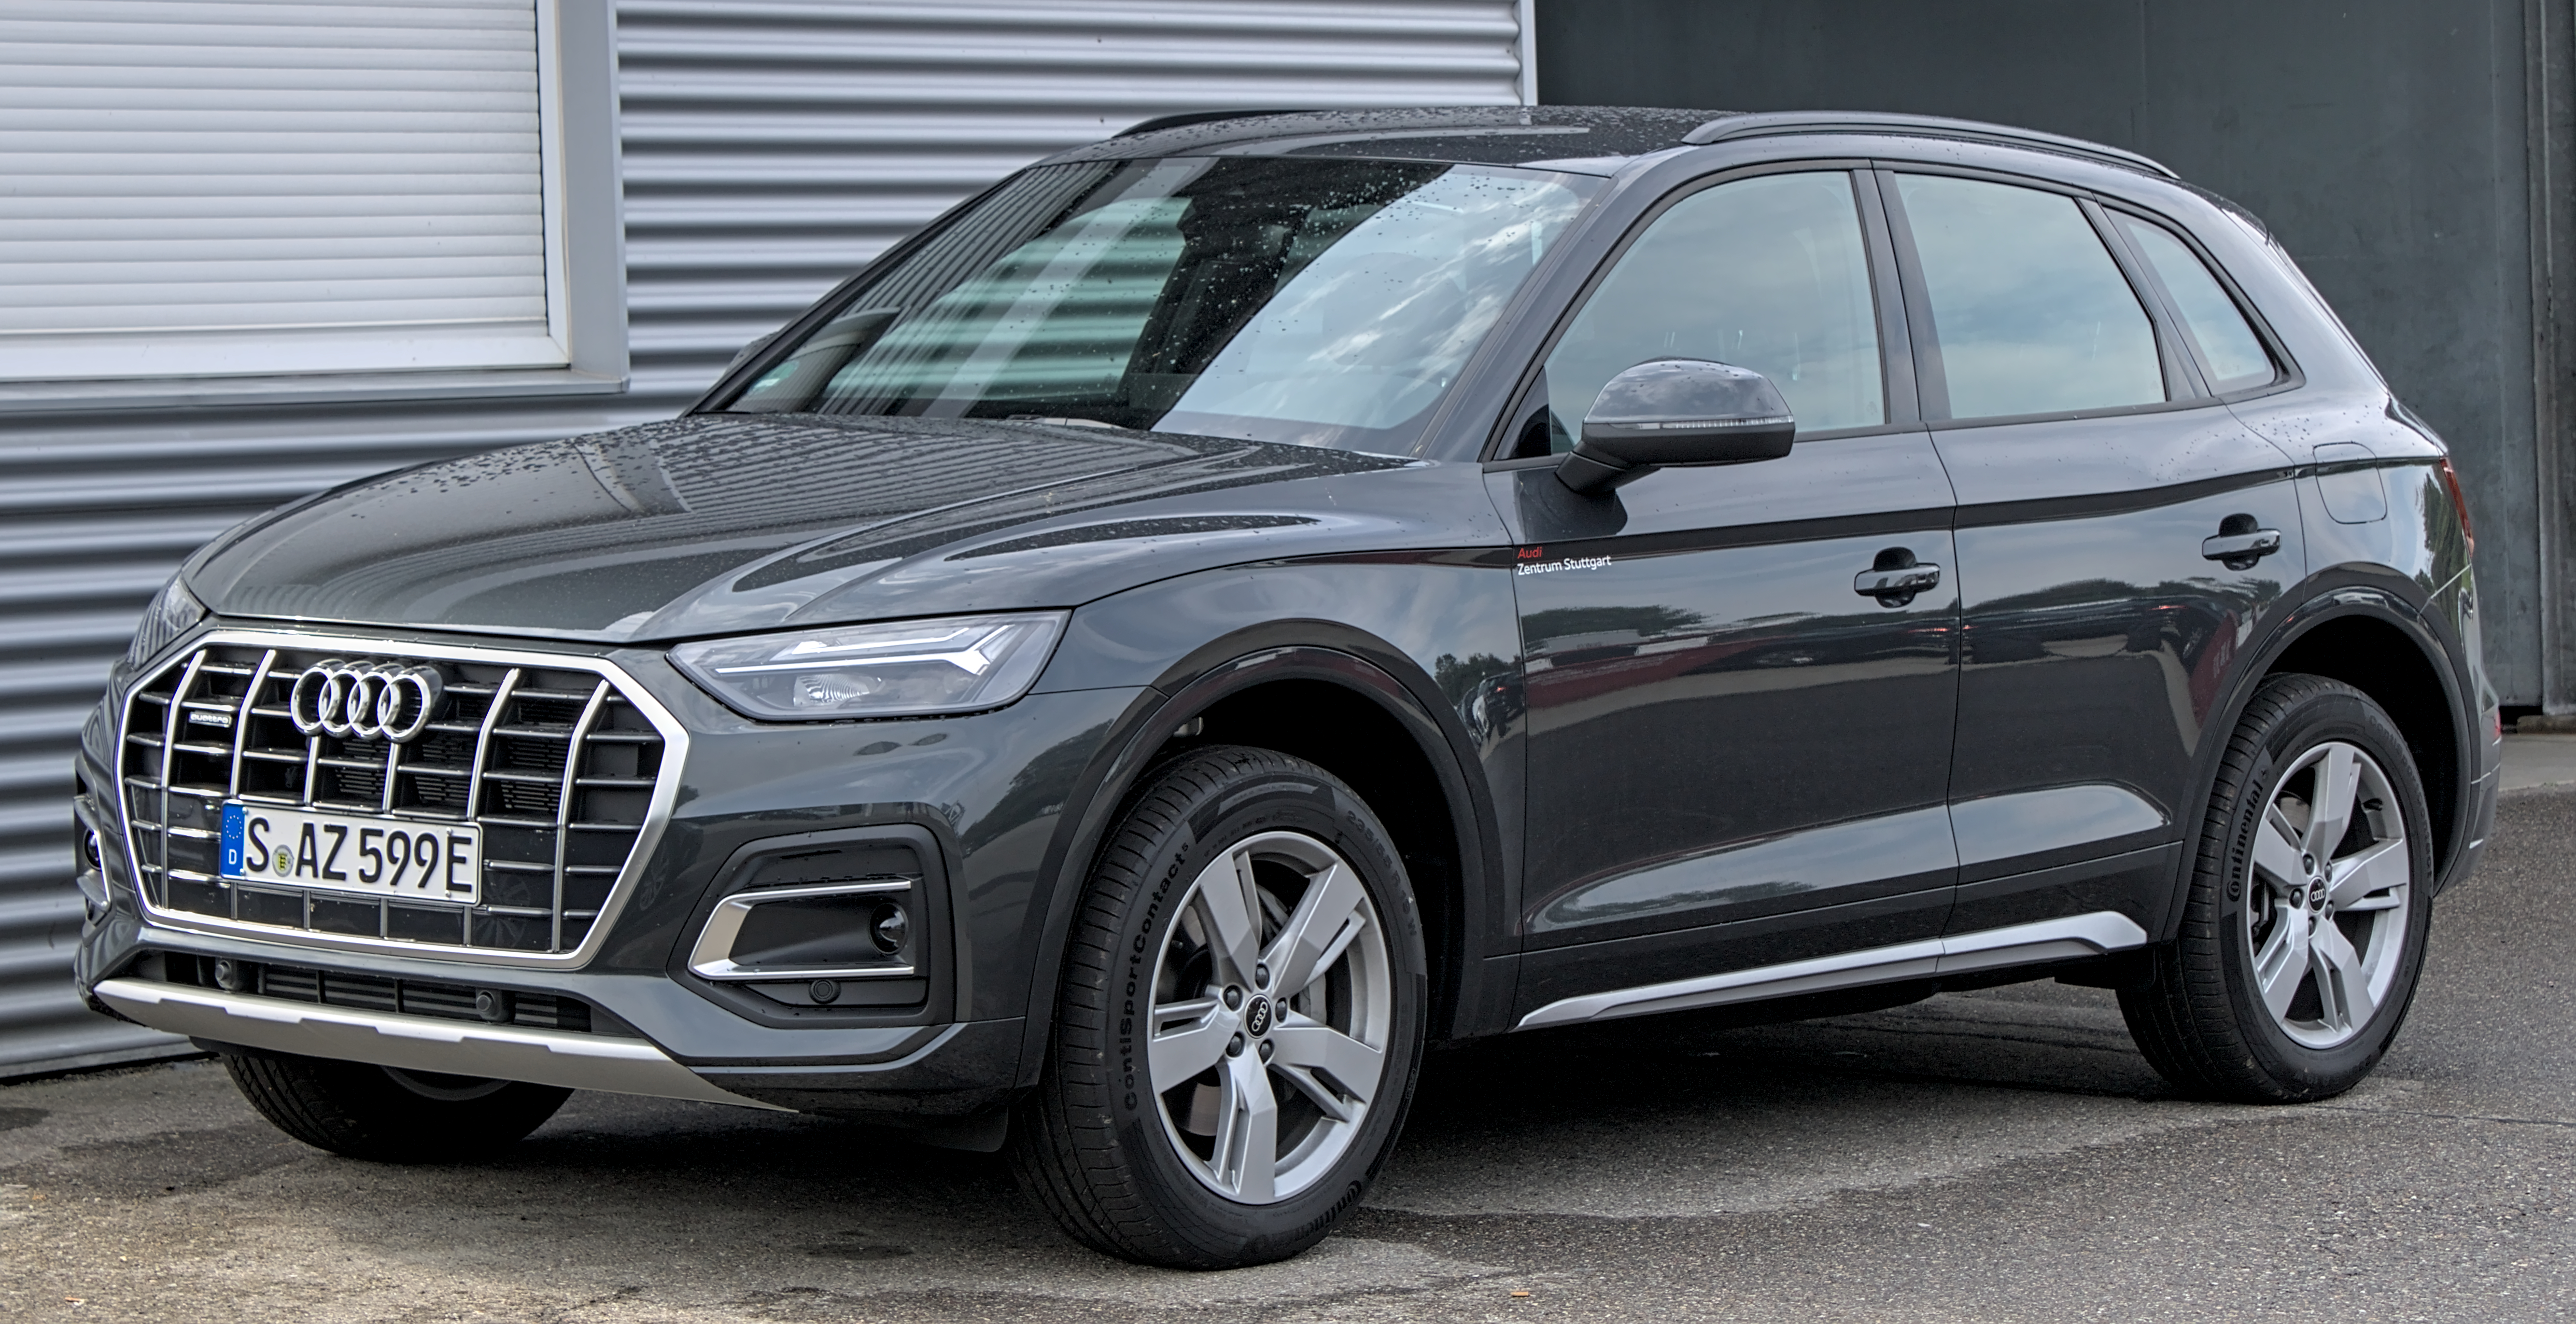 Rent A Audi Q5 For A Day Price 